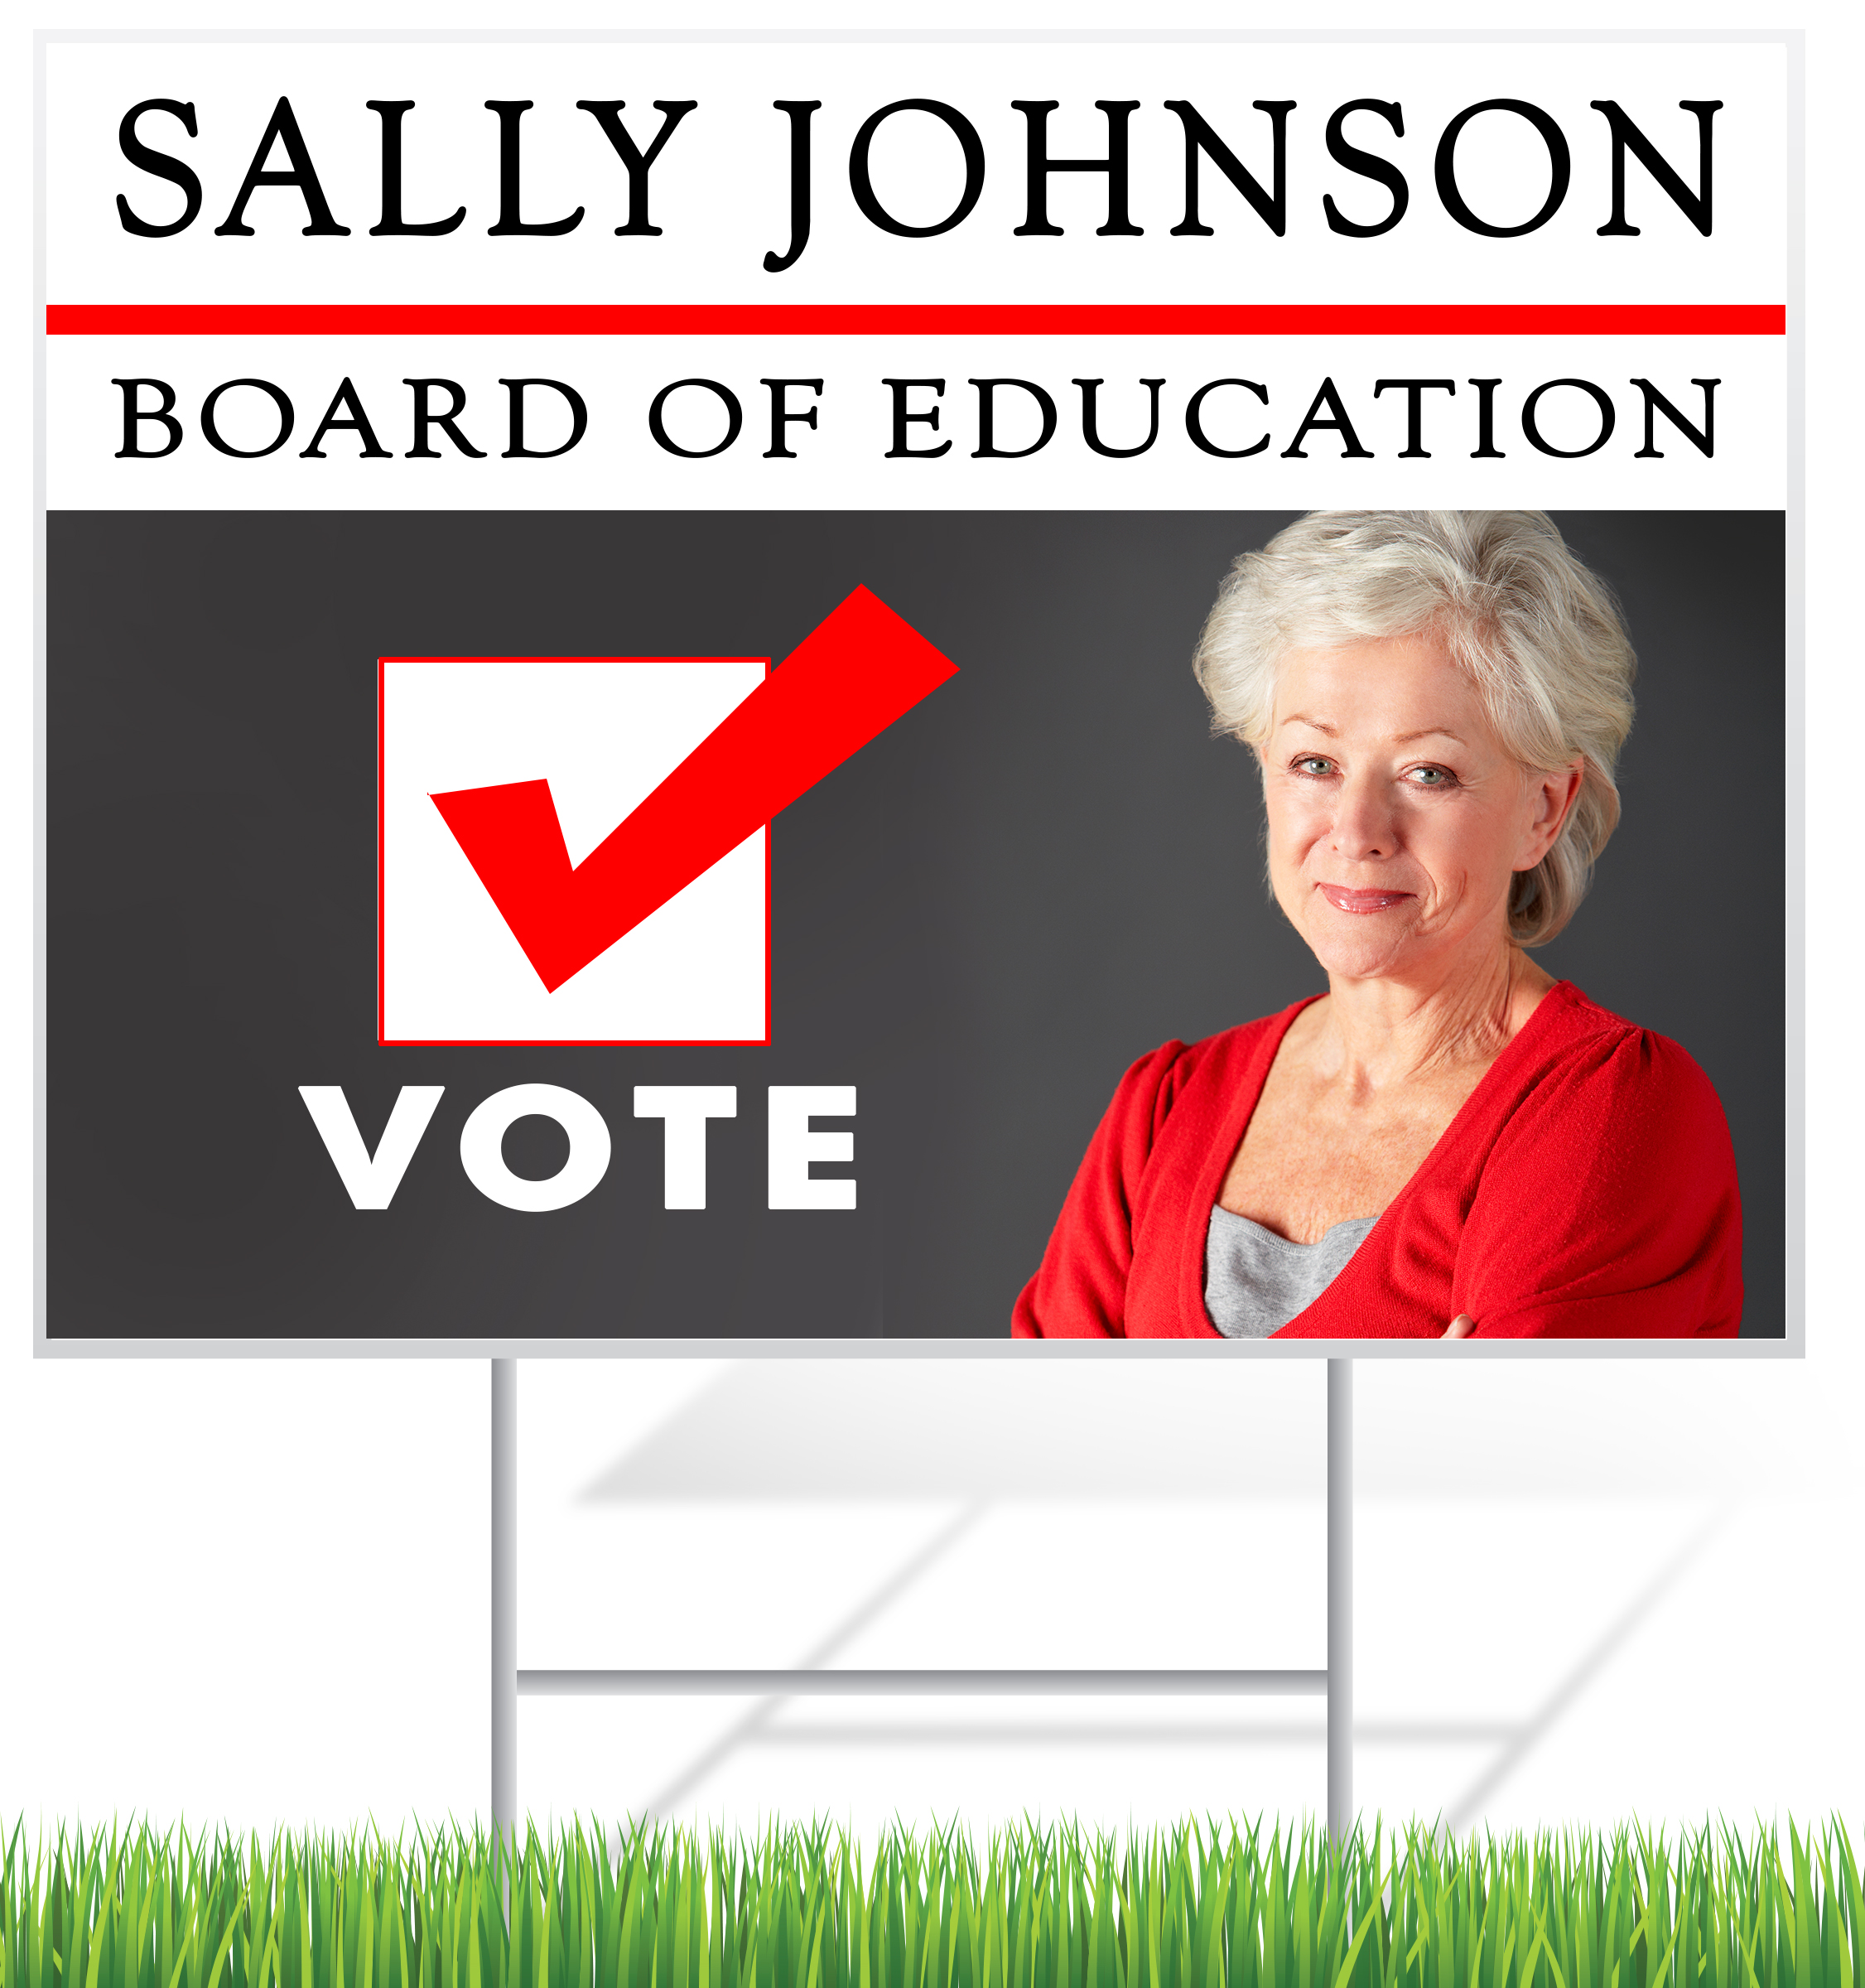 Campaign Lawn Sign Example | LawnSigns.com